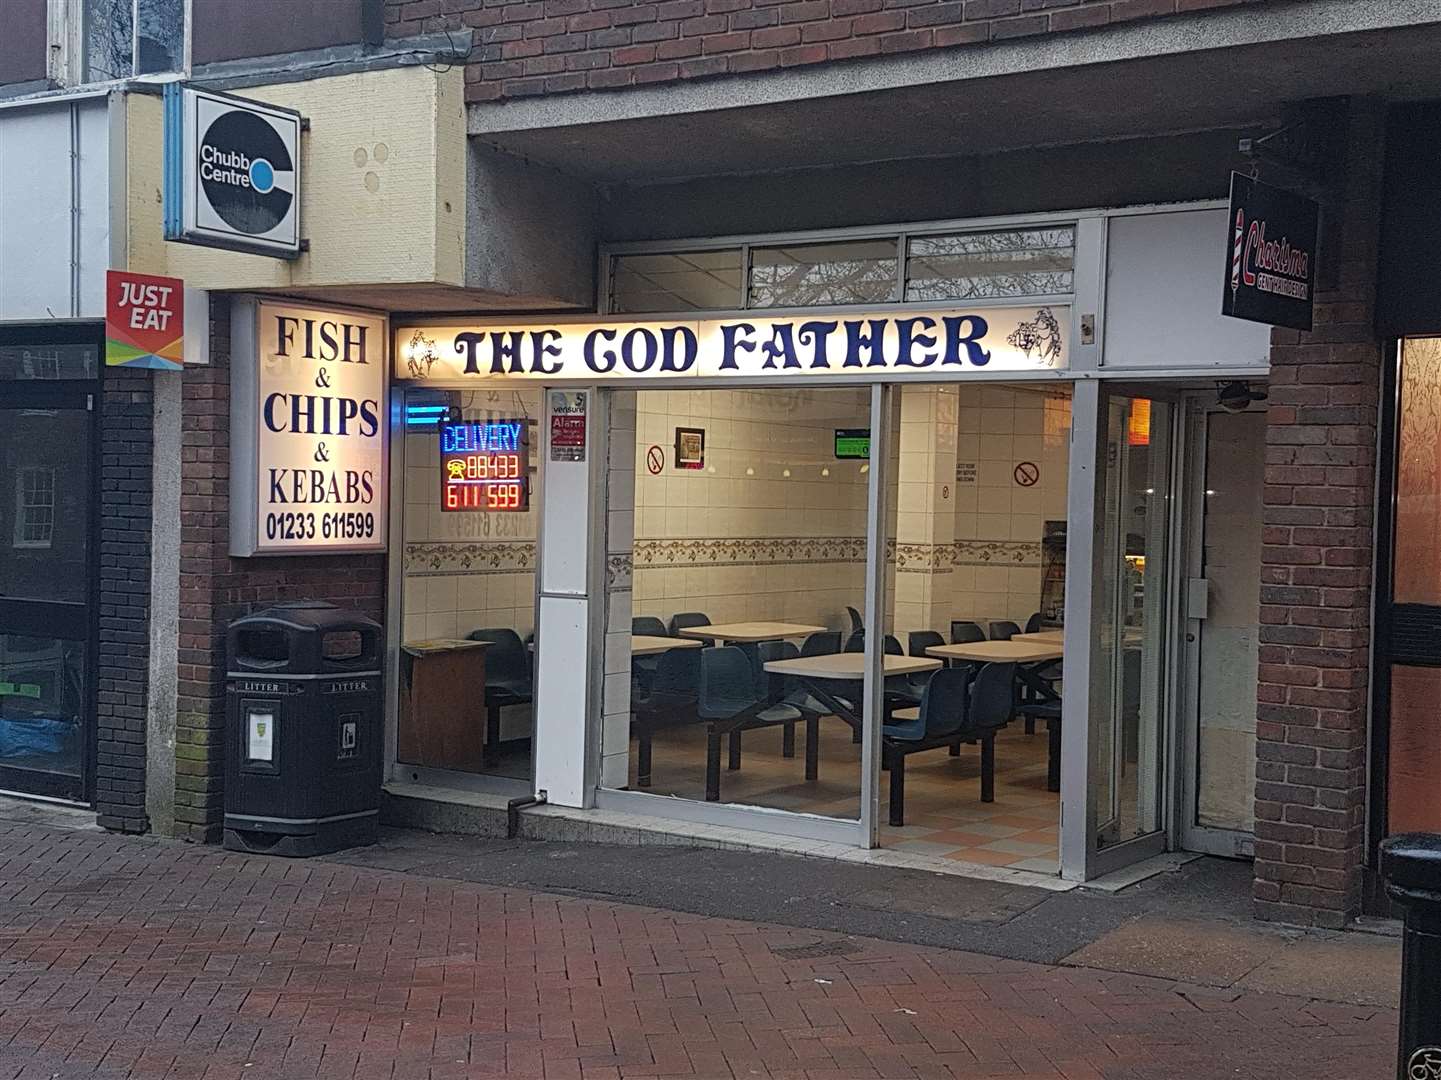 The Cod Father may lose its premises licence due to staff getting involved in a fight